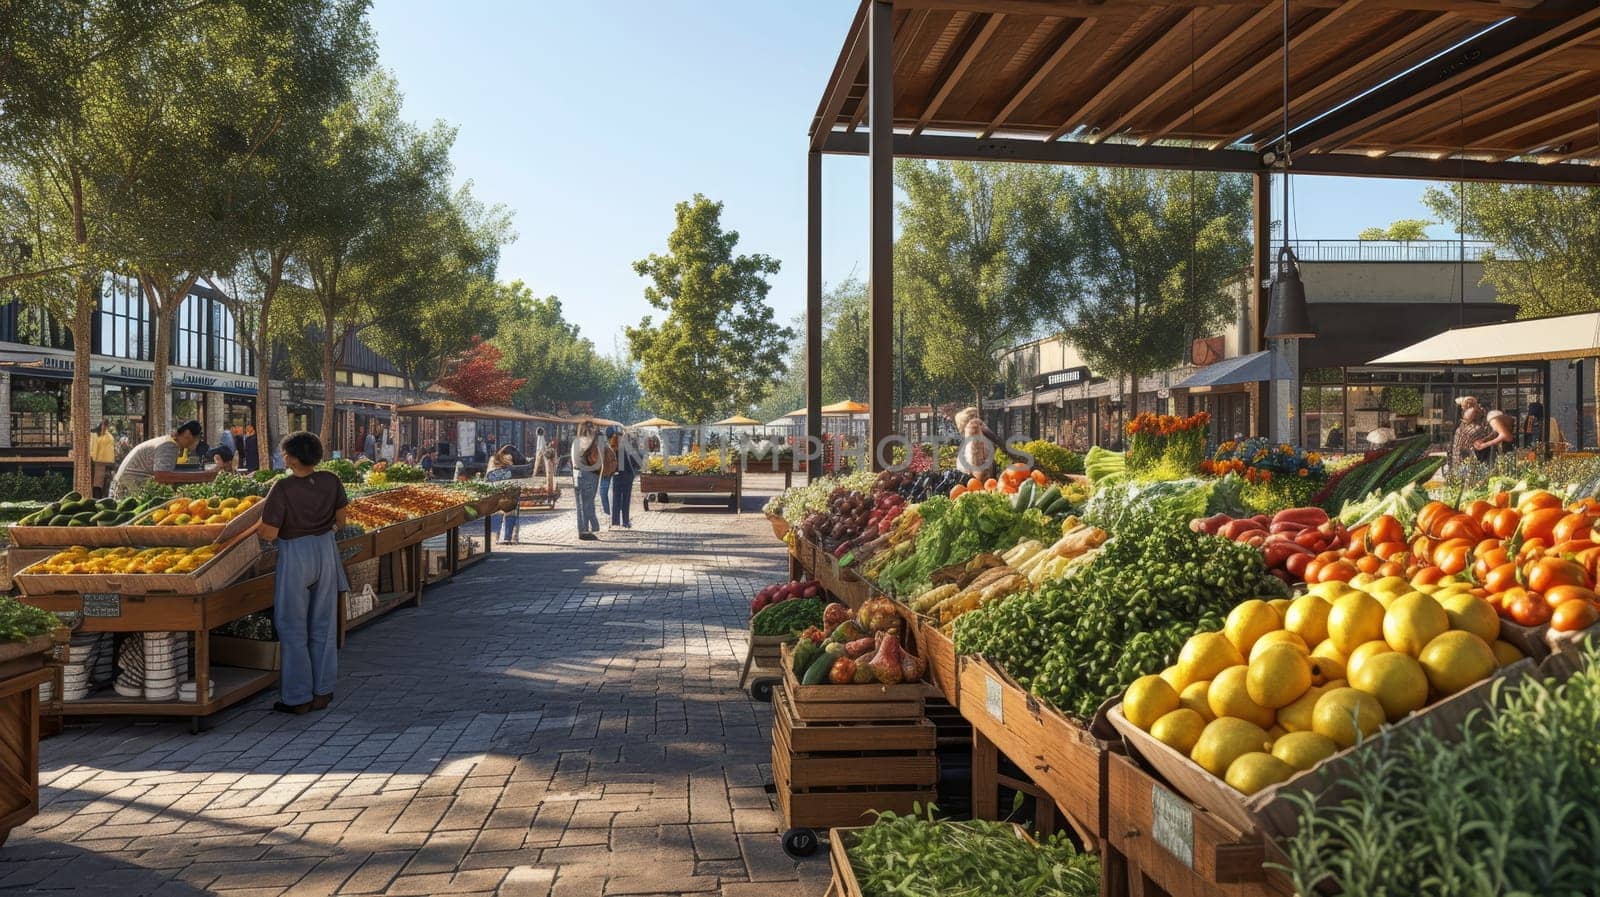 The image features a shaded alley in an outdoor market, lined with stalls offering a fresh variety of produce, inviting shoppers into a tranquil, tree-lined space.